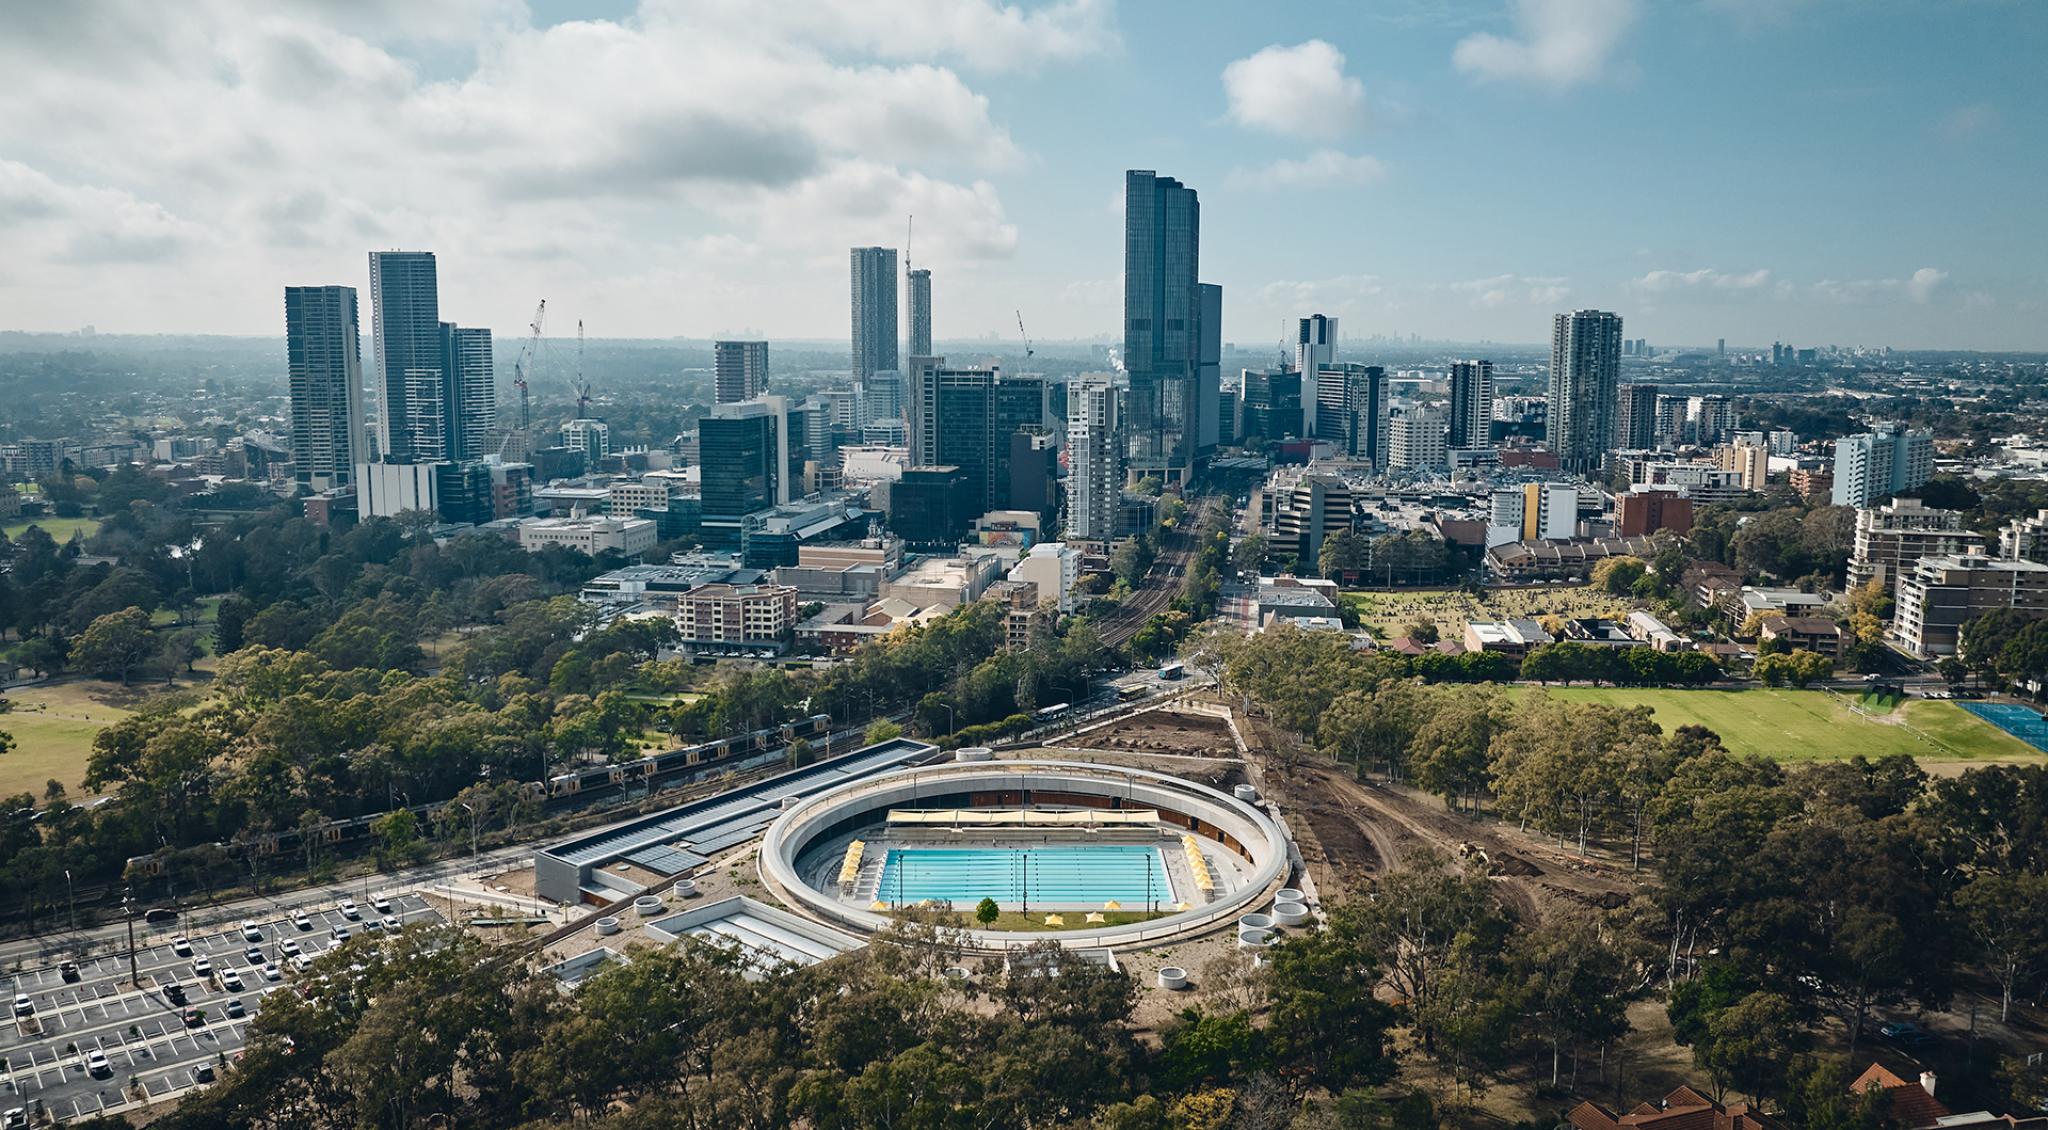 Parramatta Aquatic Centre a timely addition to Sydney’s geographical heart